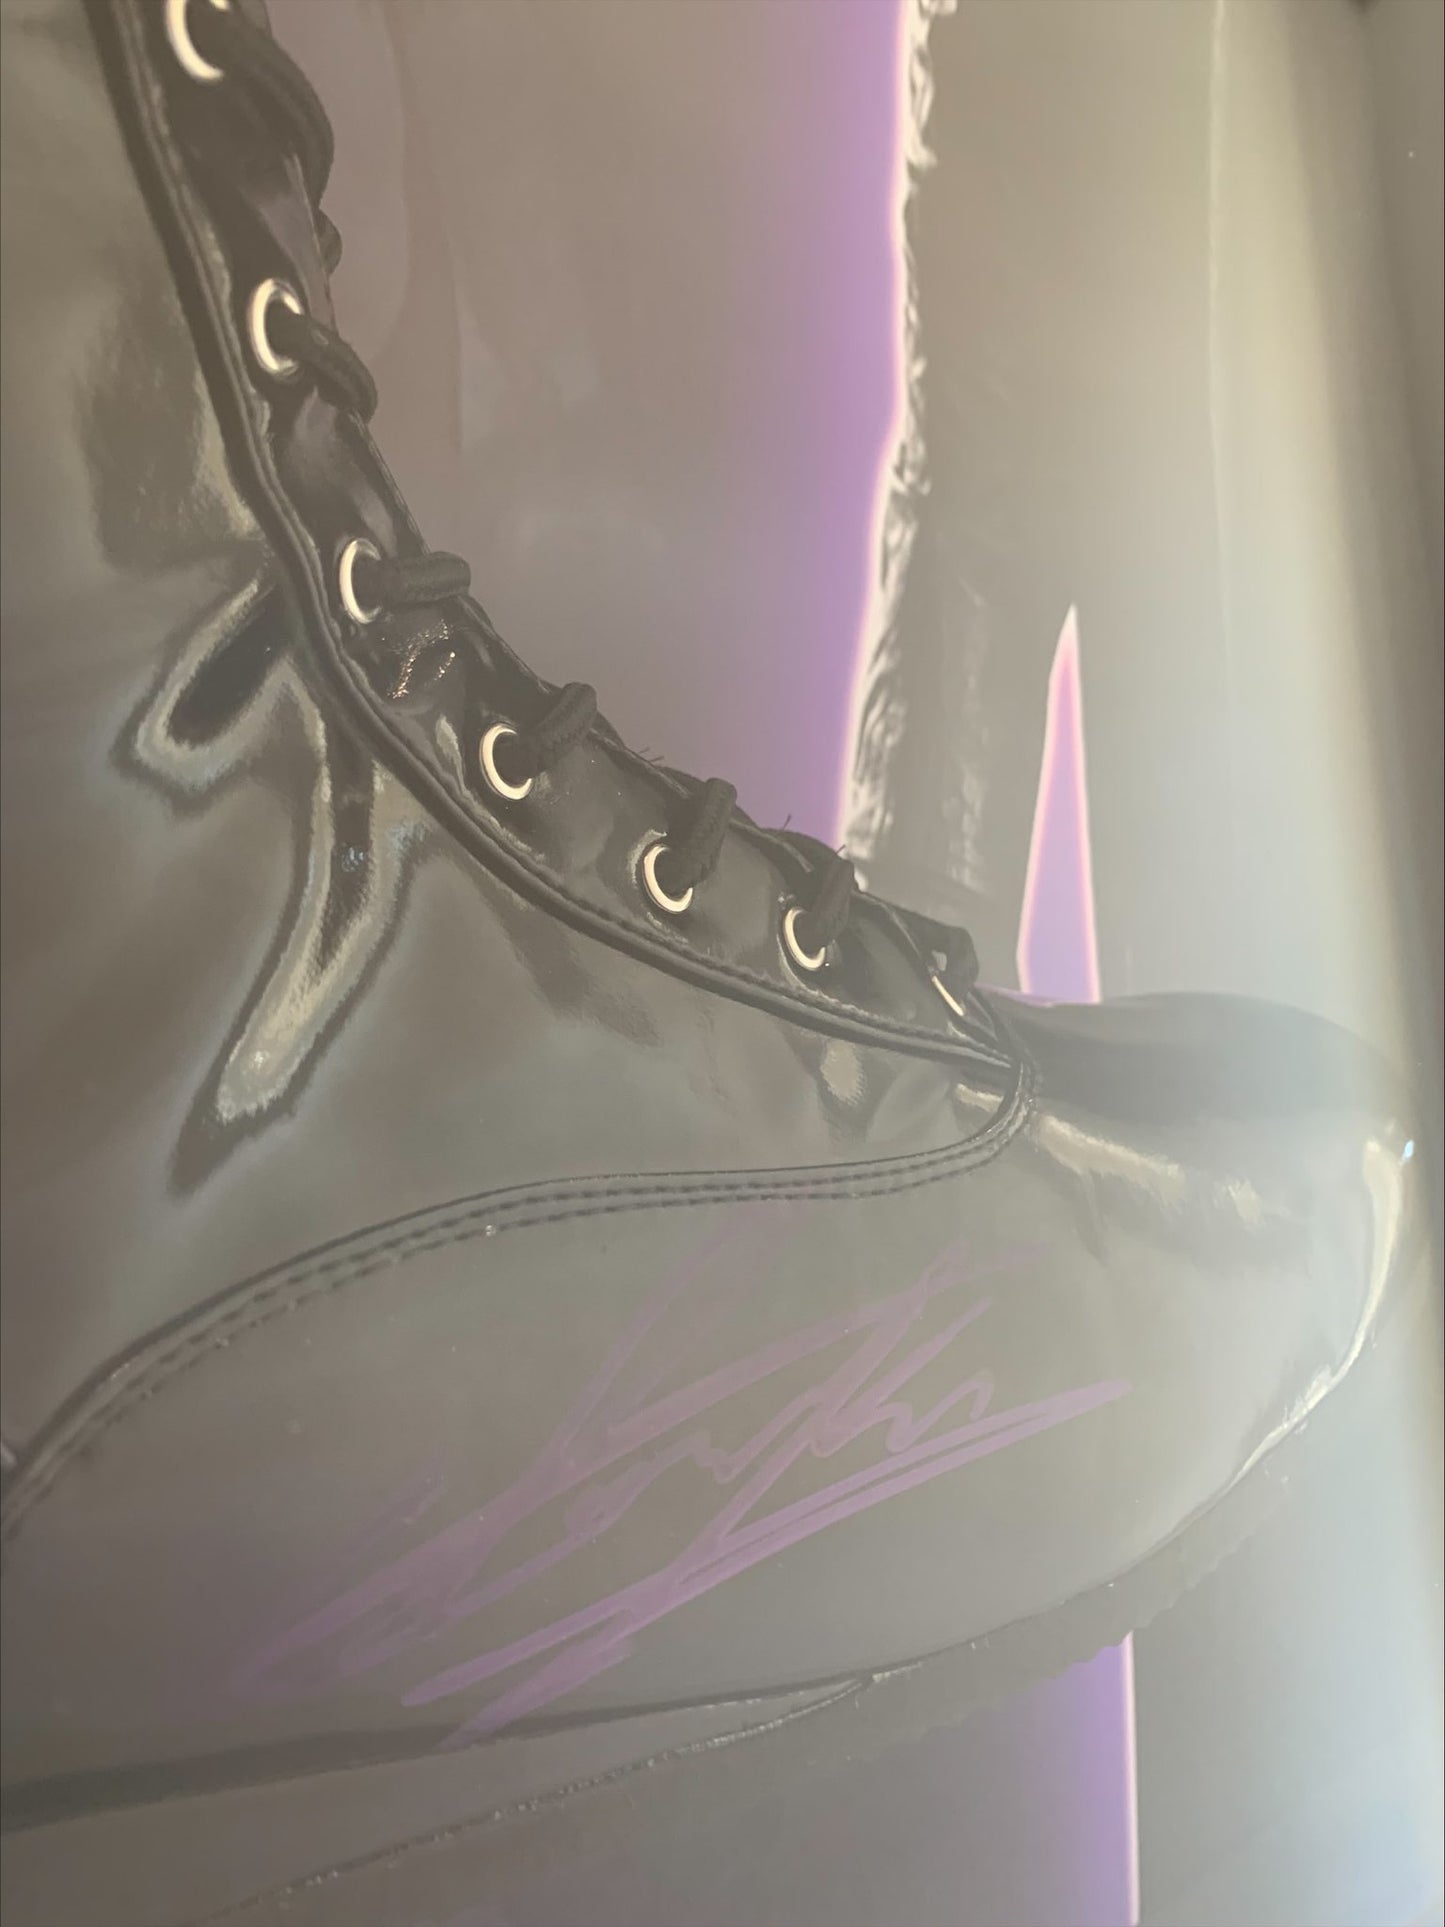 The Undertaker Signed Authentic wrestling boot with JSA Authentication